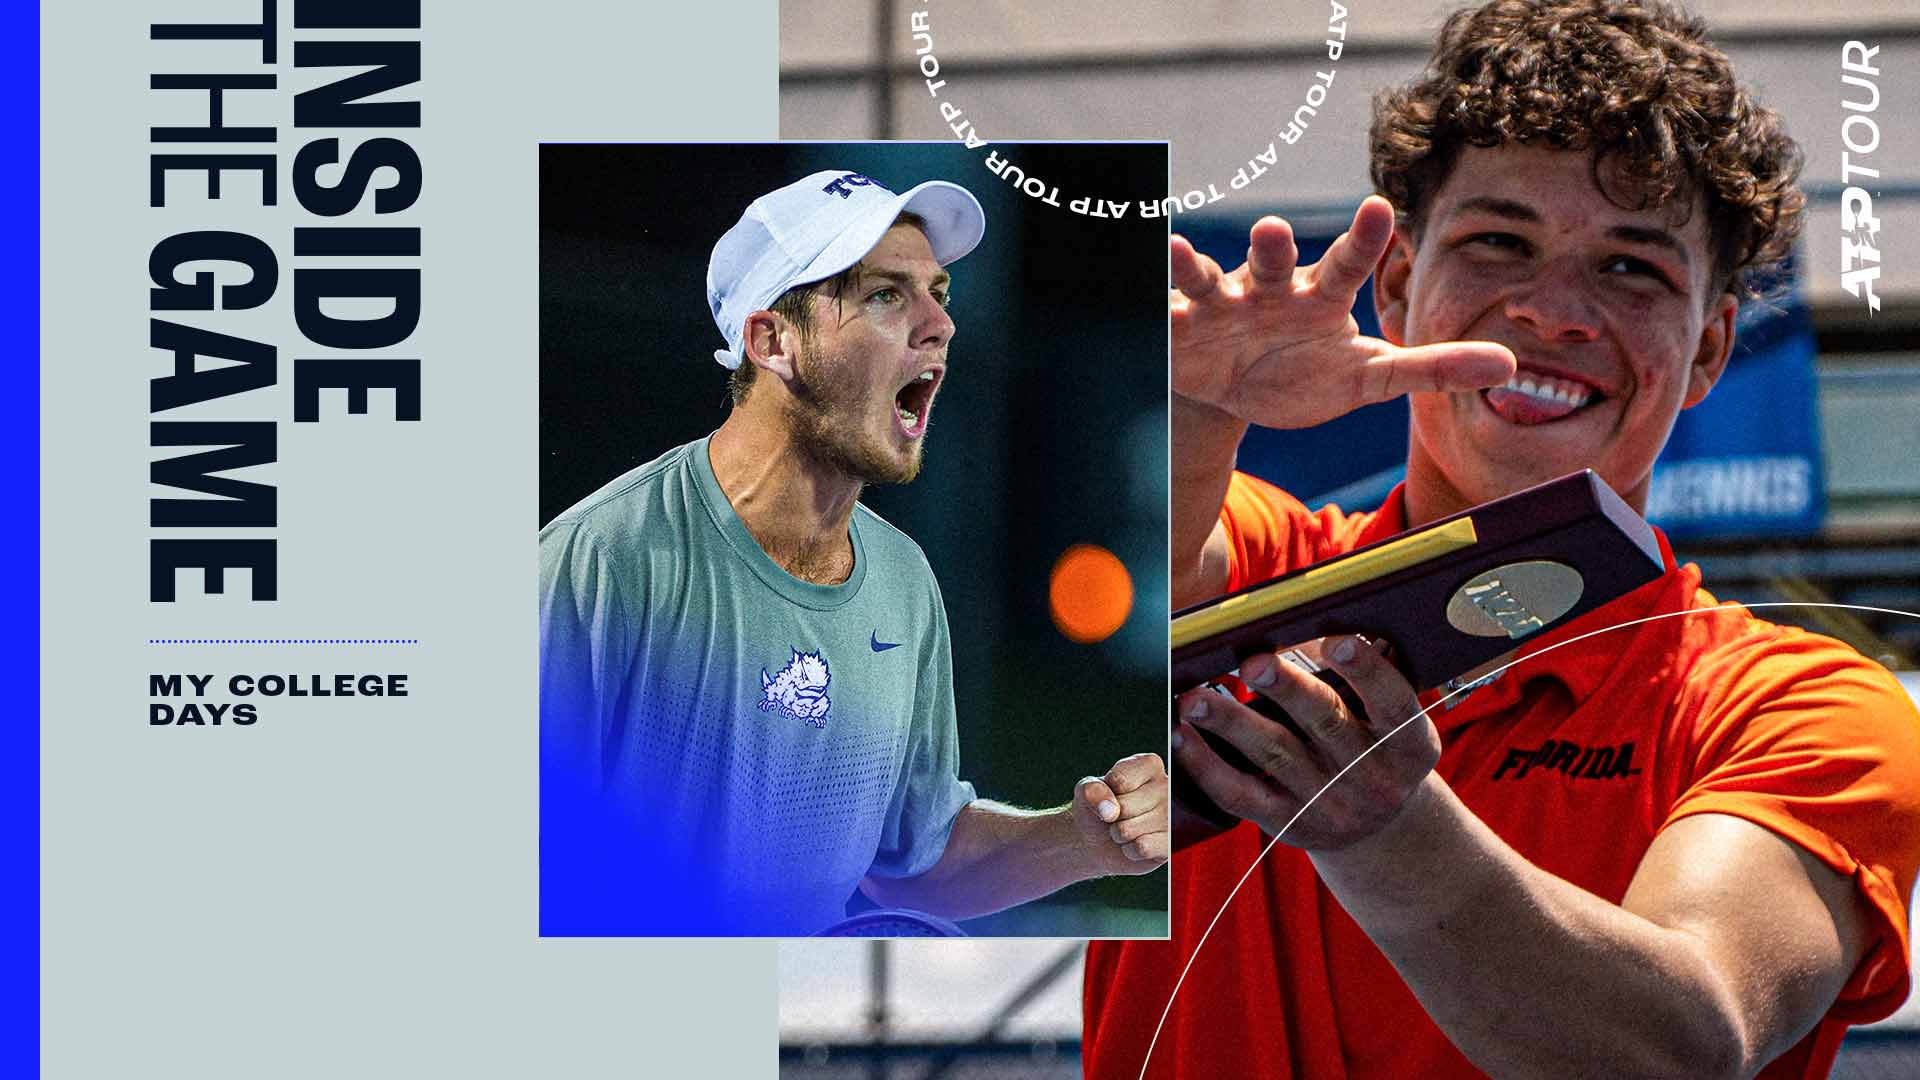 Cameron Norrie and Ben Shelton